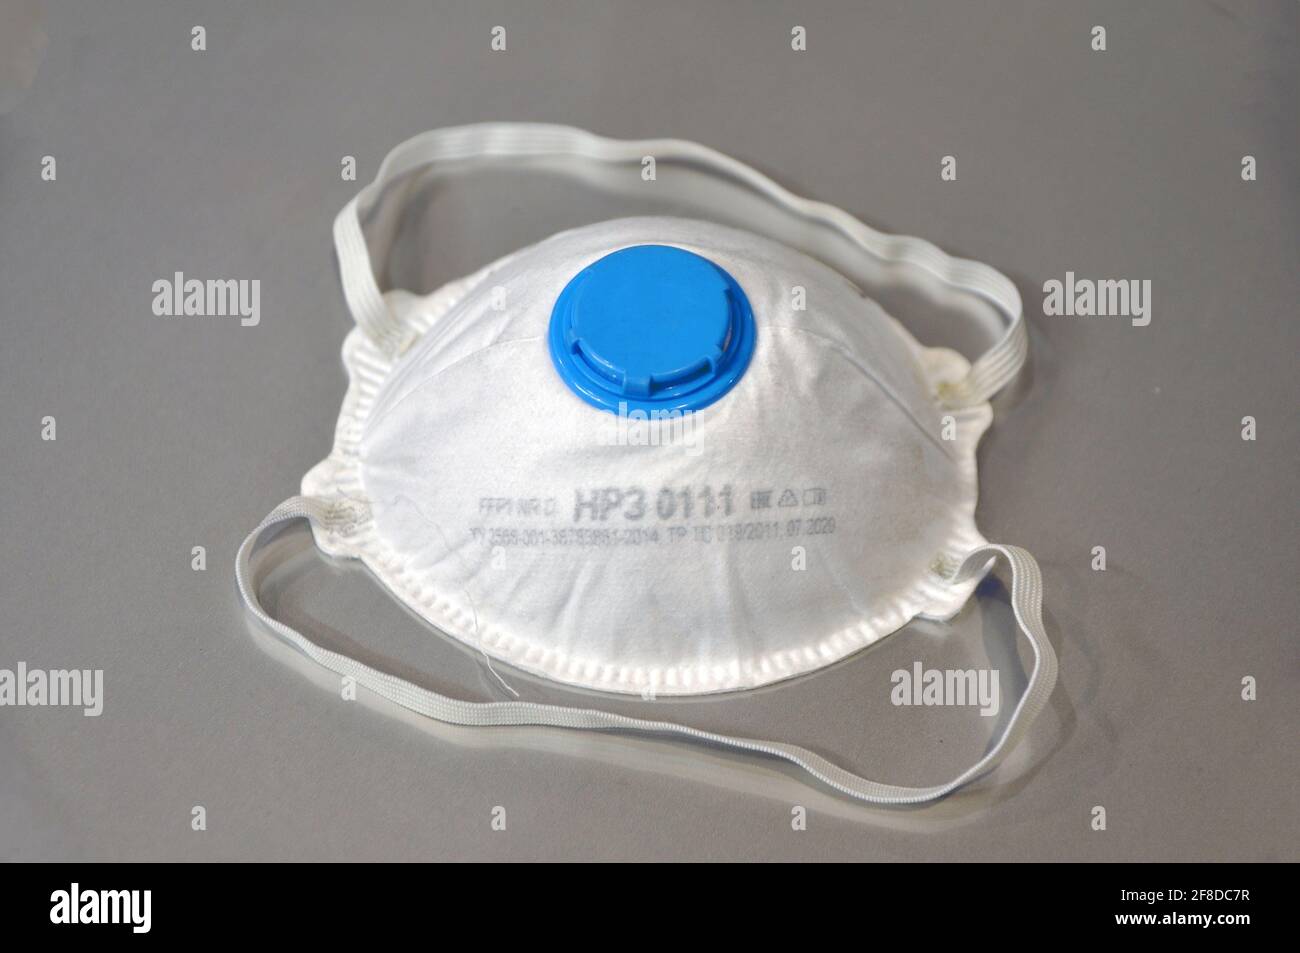 Protective industrial respirator against dust, gases and aerosols. Stock Photo